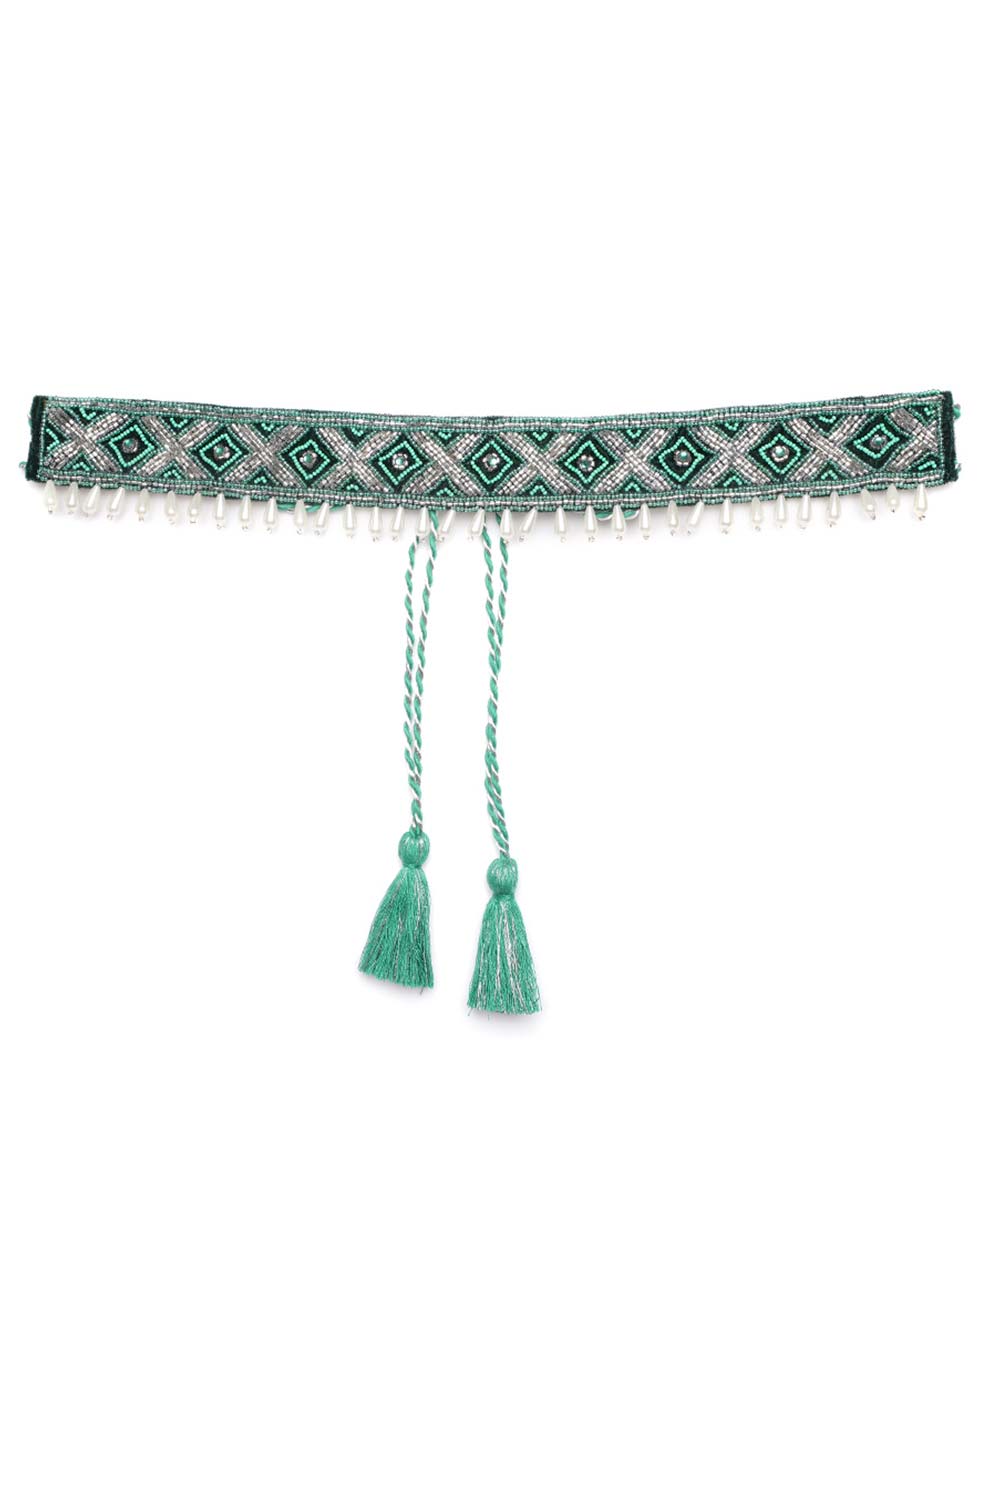 Buy Geometric Bead Work Saree Waist Belt in Turquoise & Silver Online - One Minute Saree